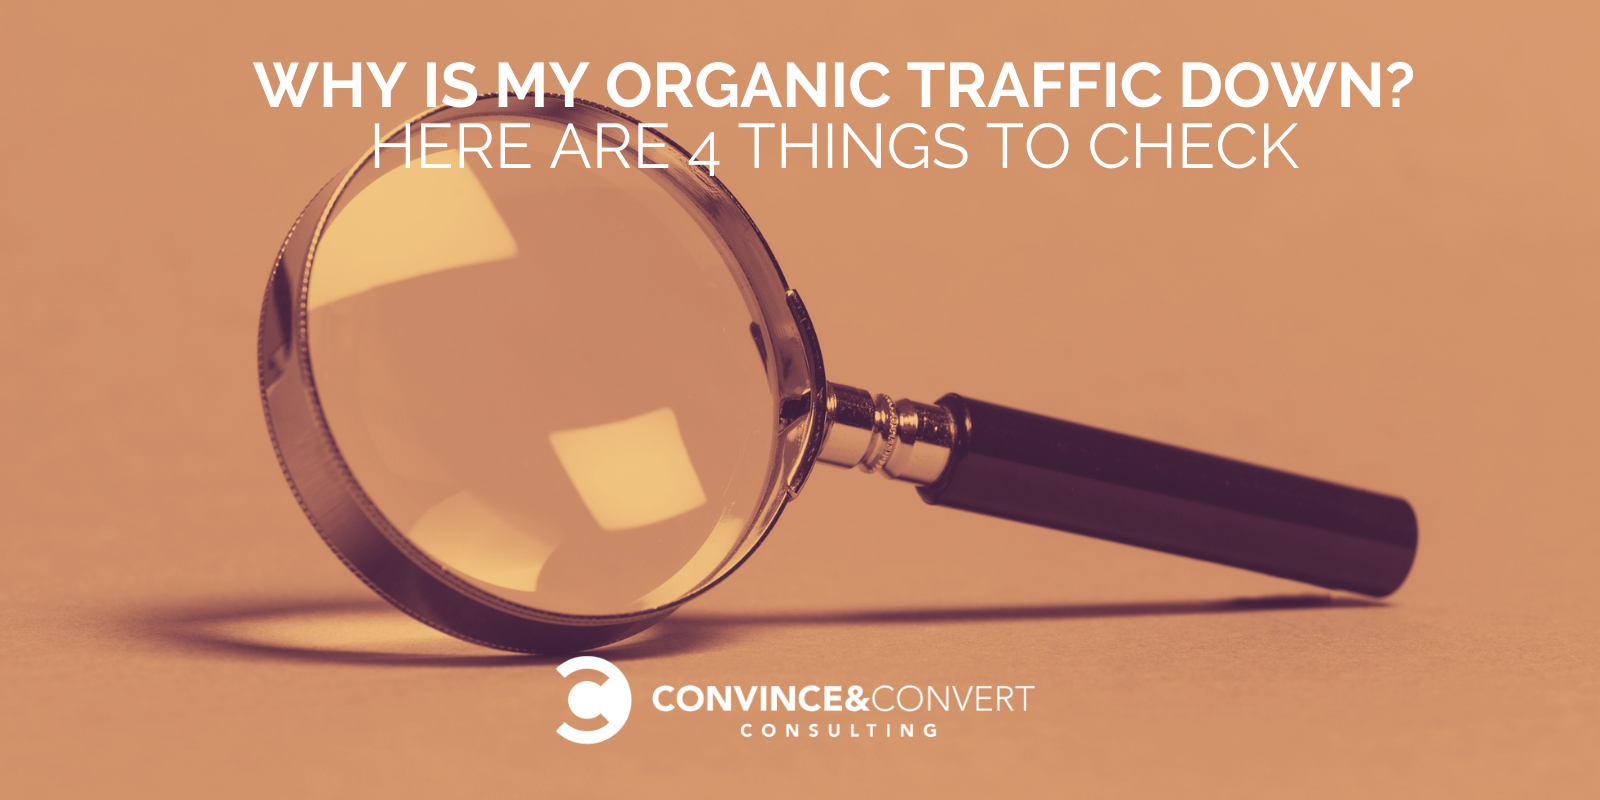 Why Is My Organic Traffic Down? Here Are 4 Things to Check